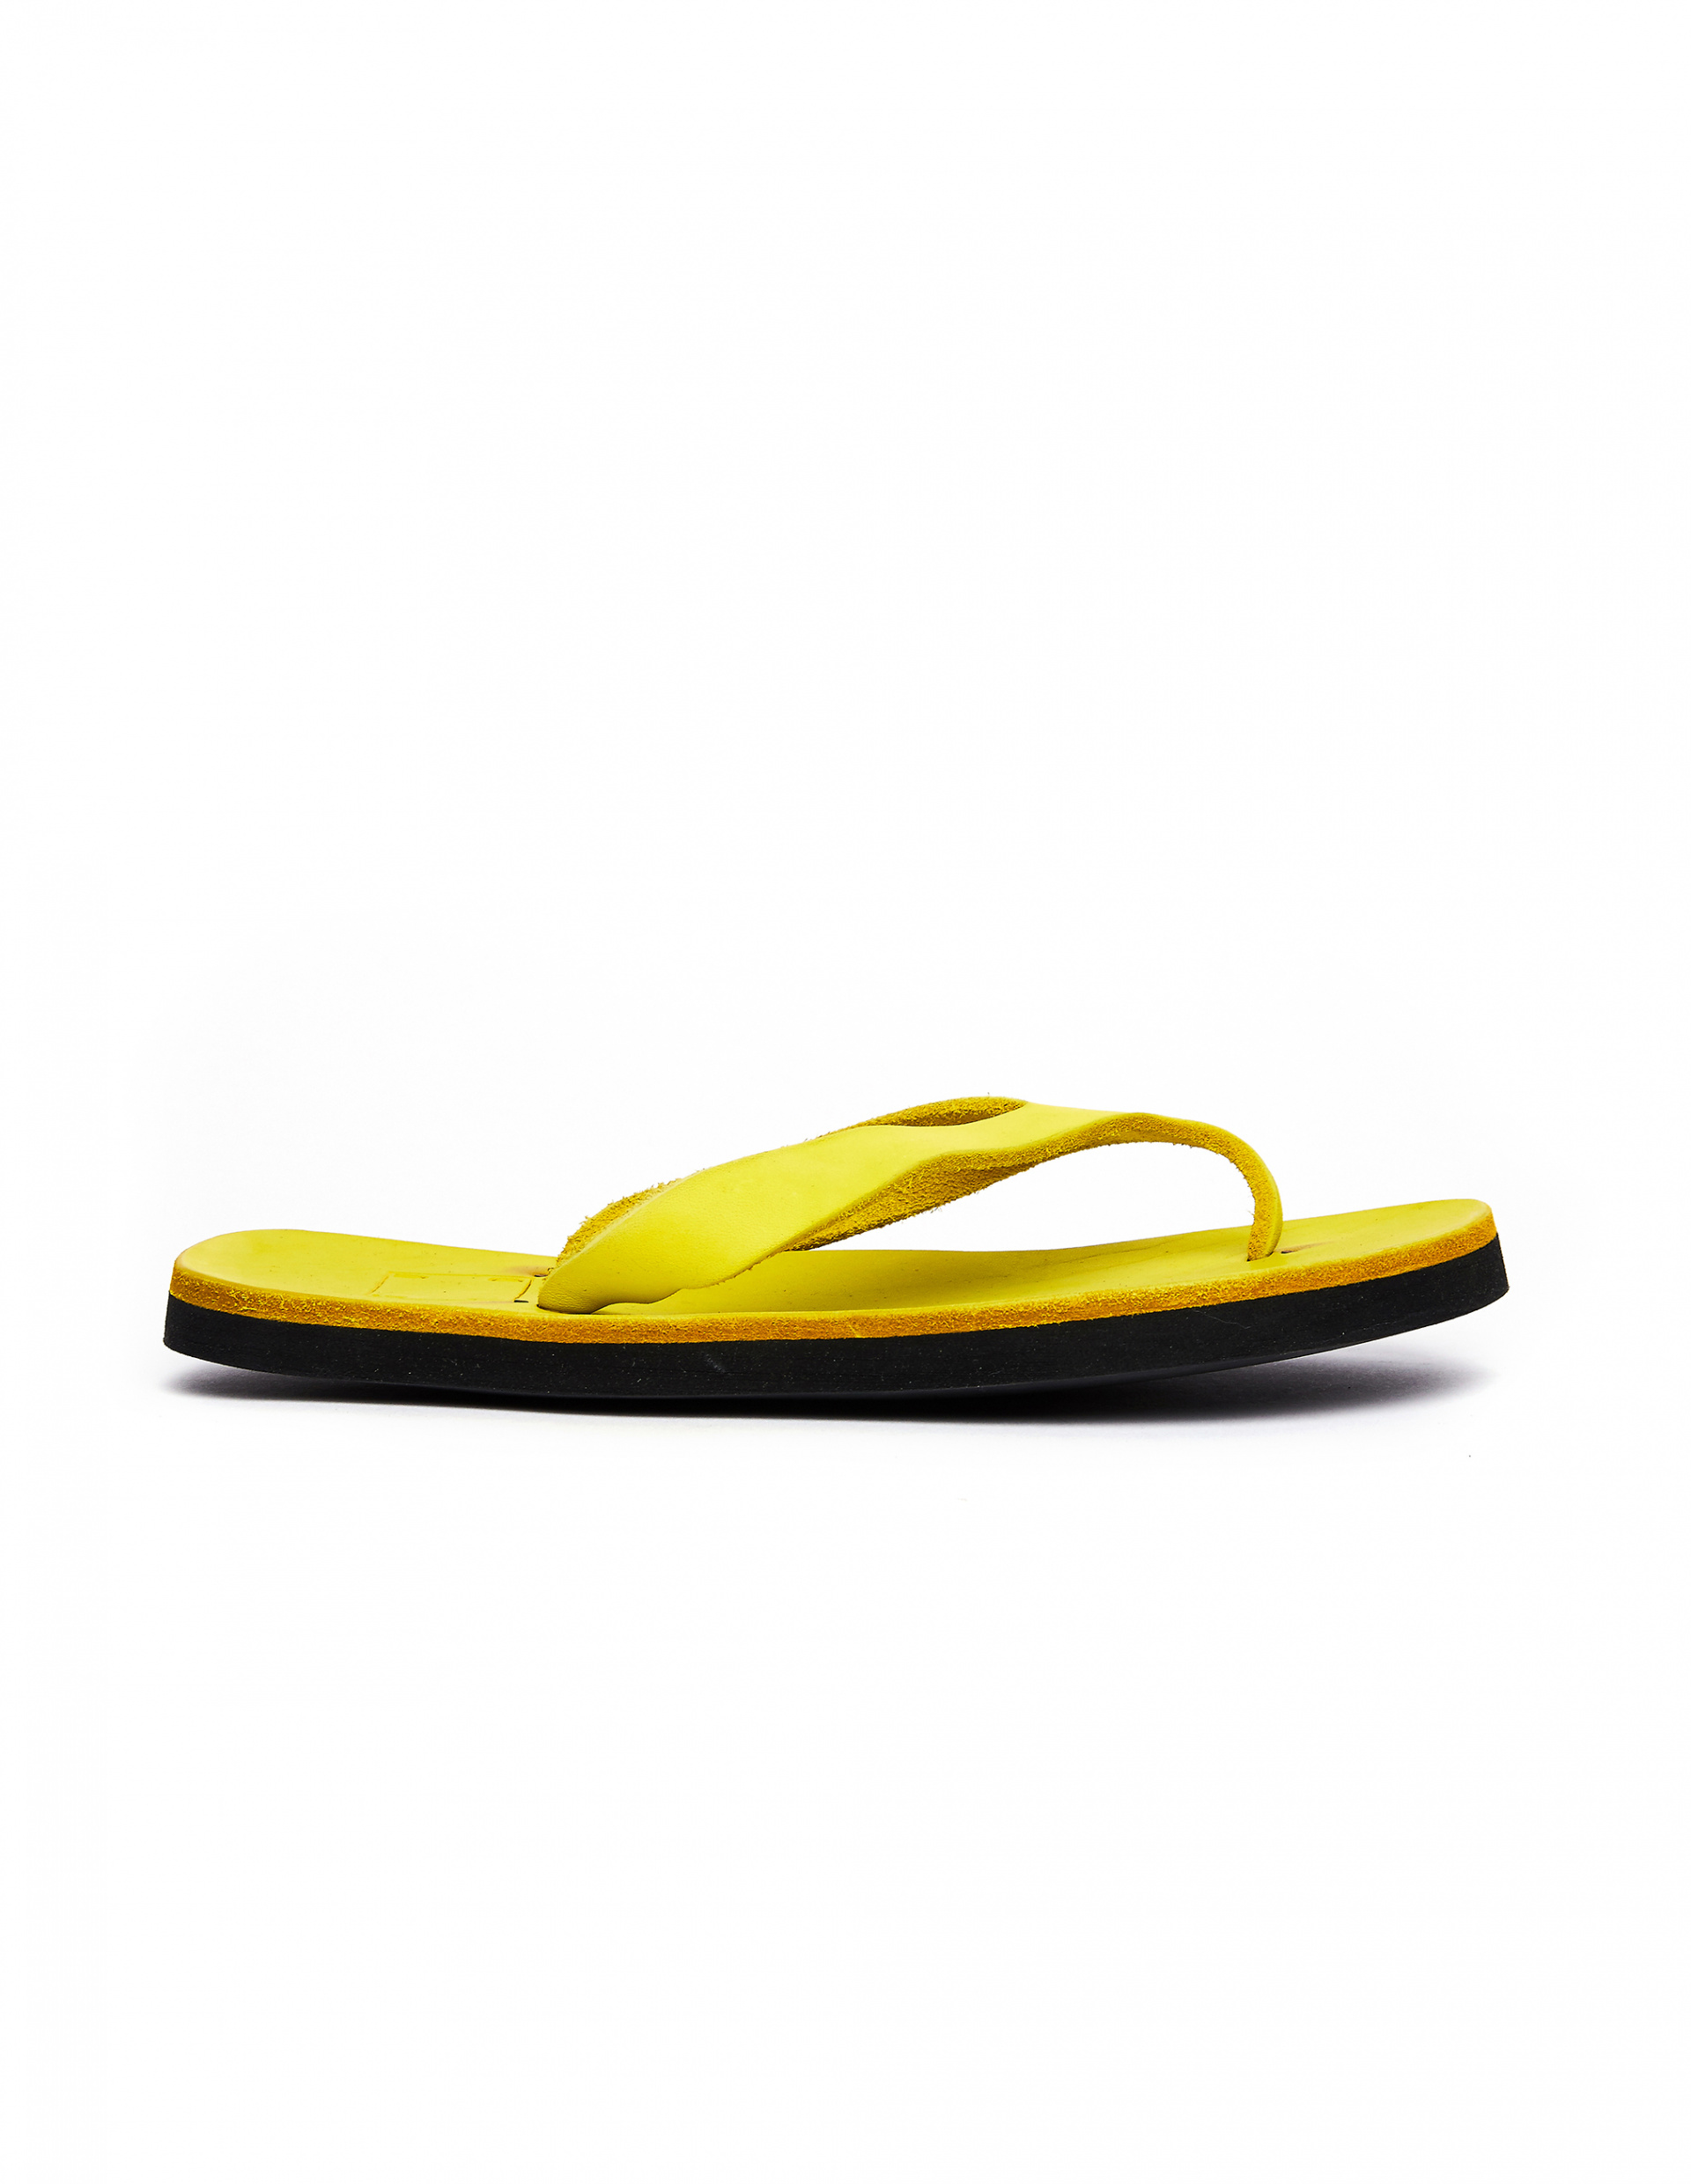 Shop Guidi slippers & sandals for women online at SV77